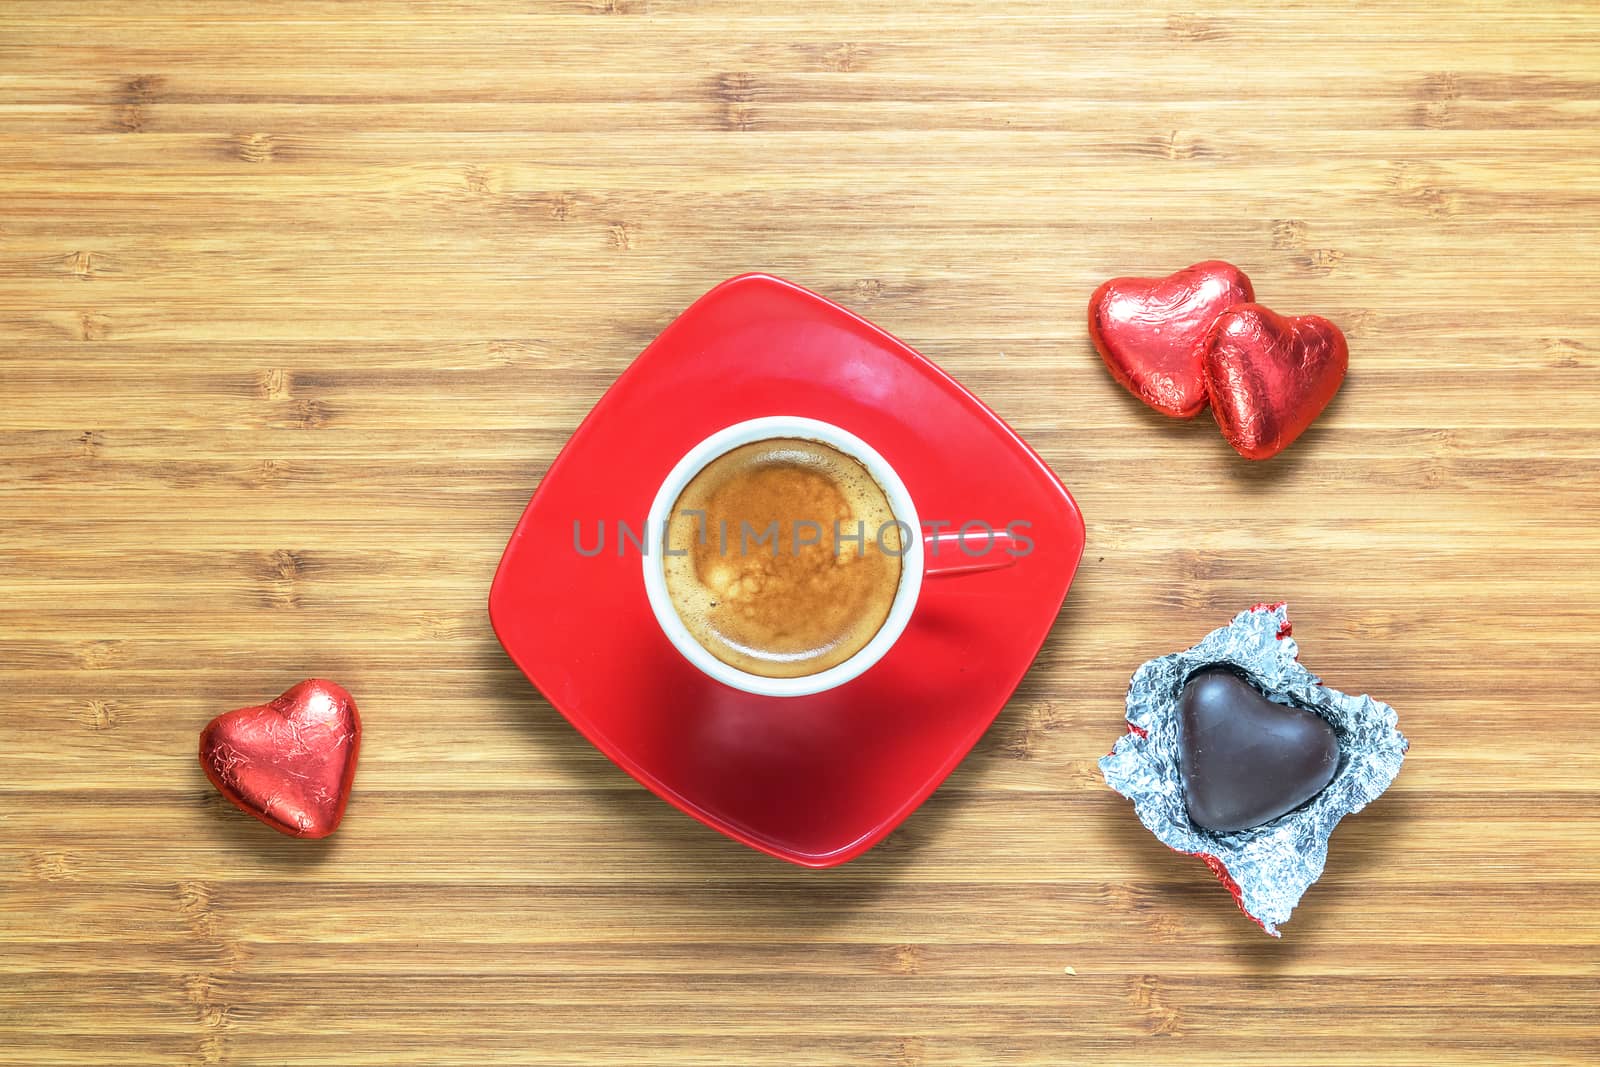 Heart shaped sweets wrapped in a bright red foil lying on a wooden texture with red cup of coffe near it. Background for romantic themes.